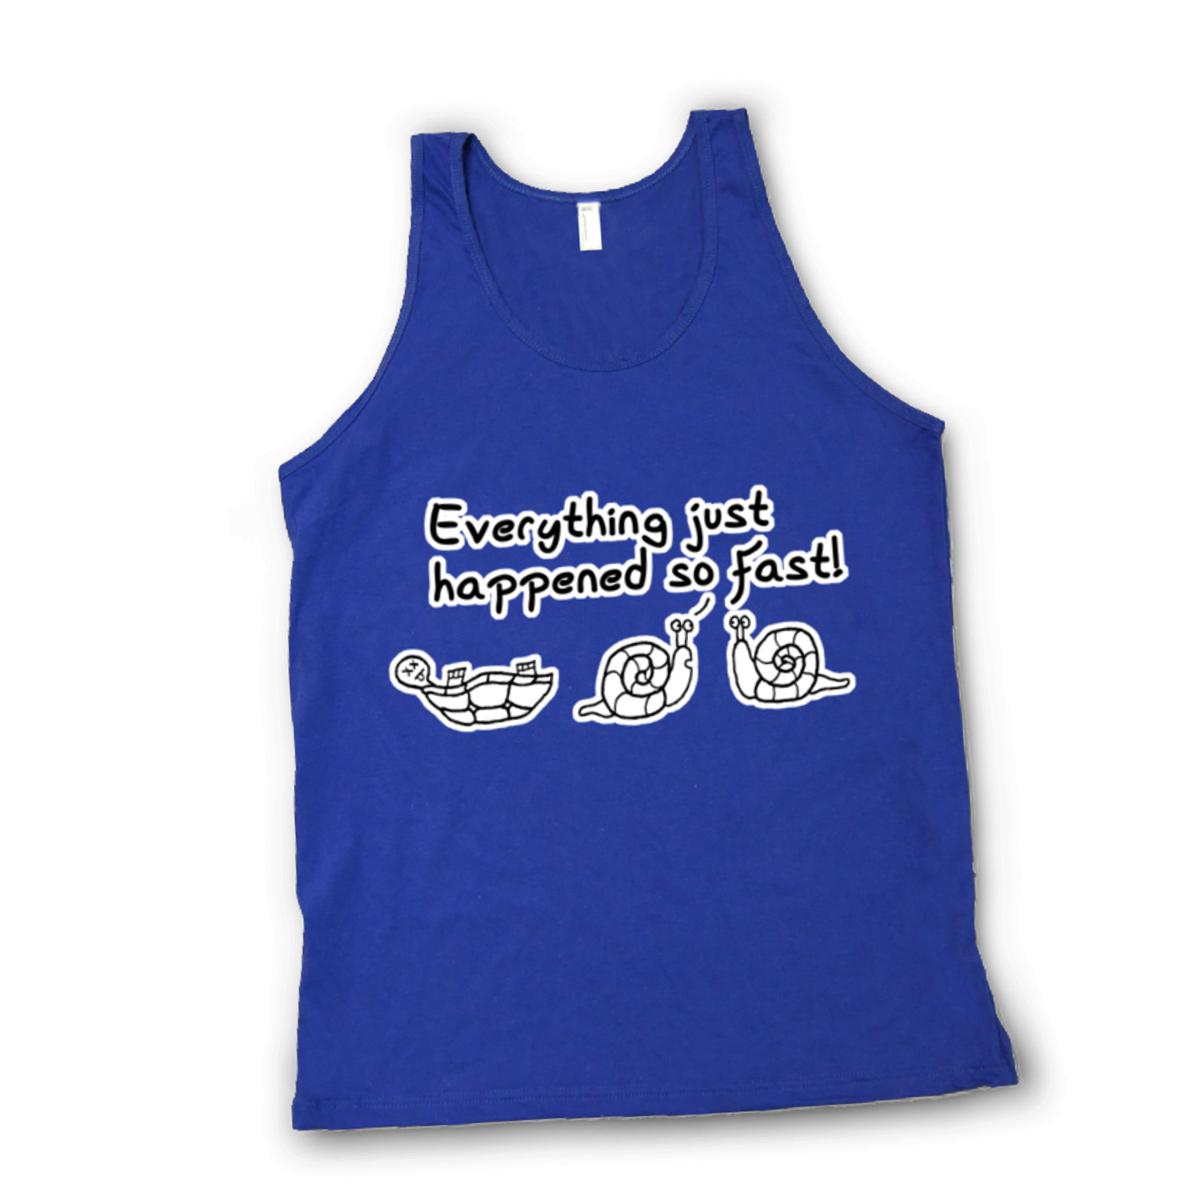 Happened So Fast Unisex Tank Top Extra Small lapis